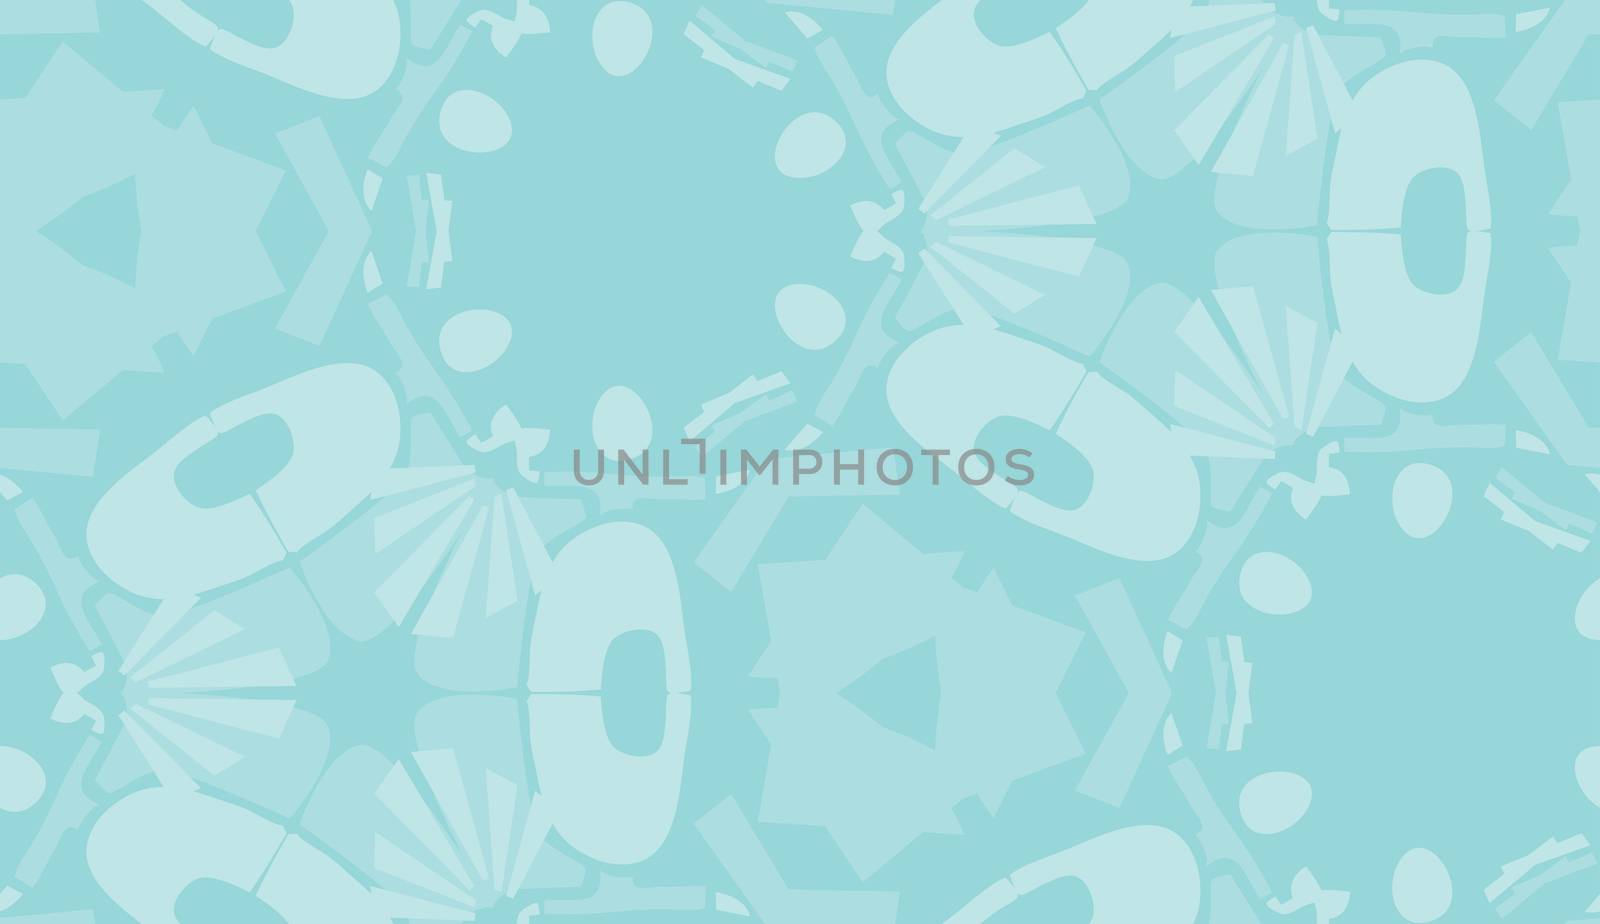 Repeating Wallpaper Pattern in Blue Shapes by TheBlackRhino